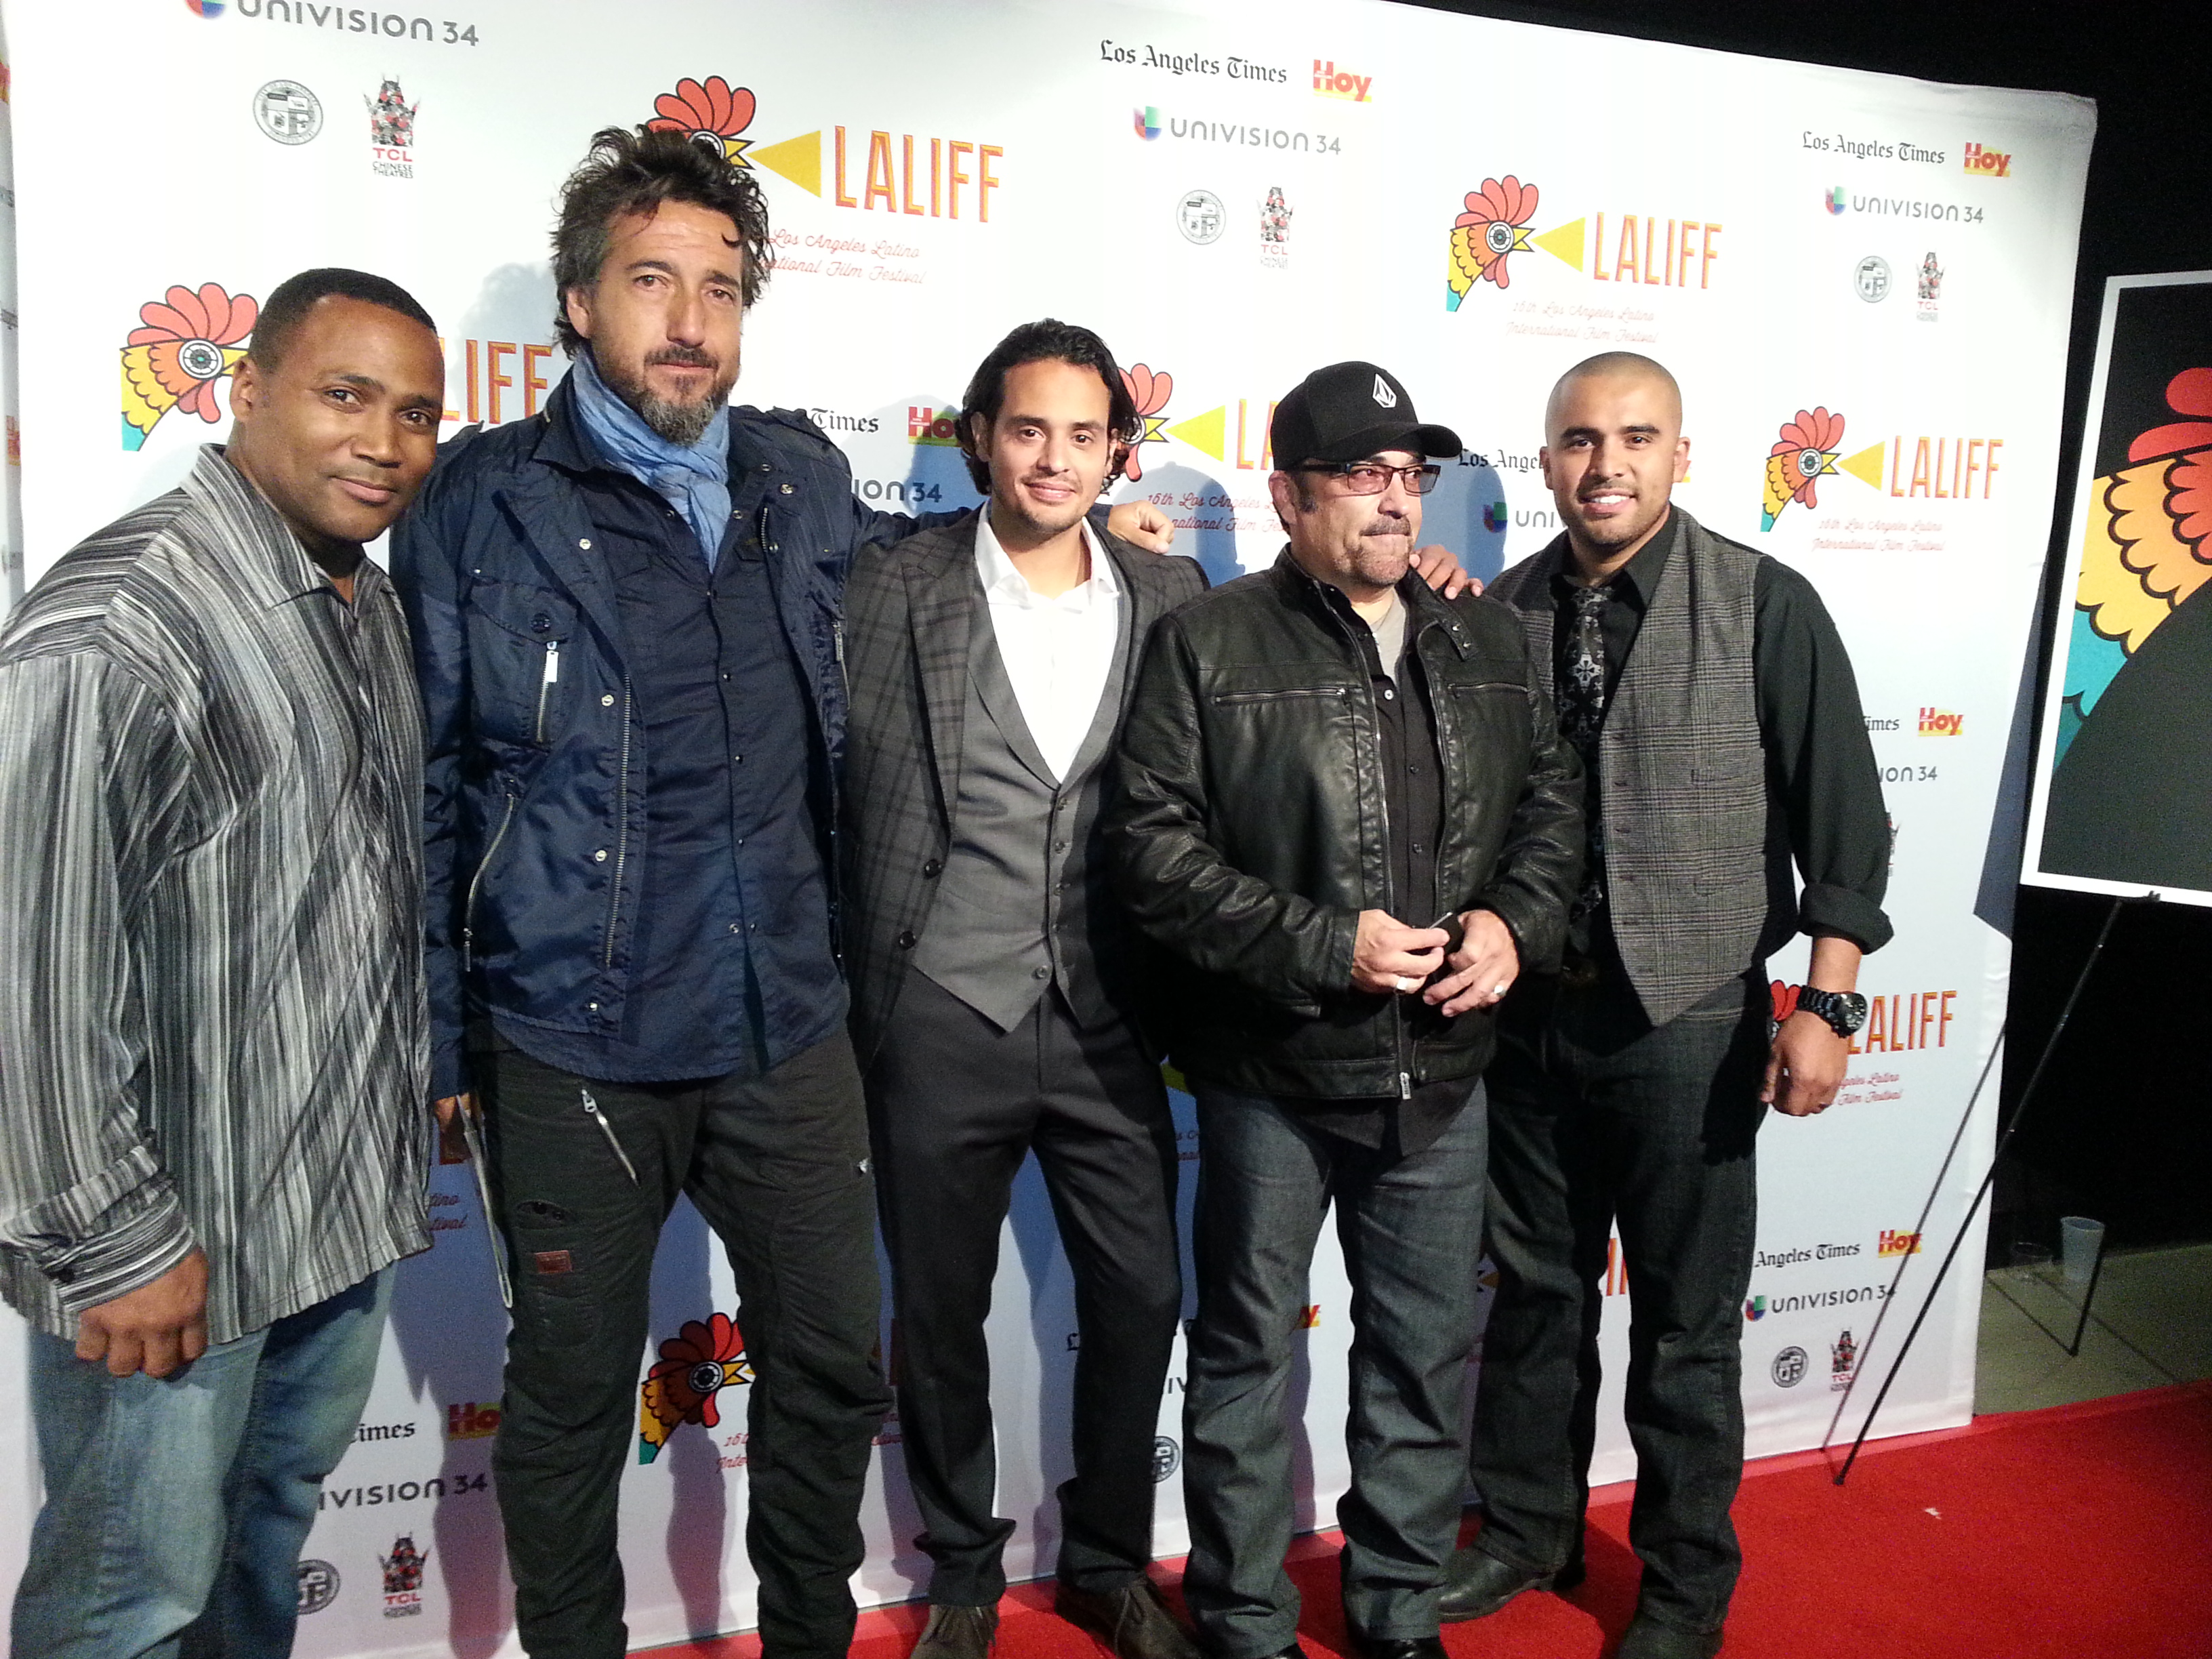 Our Boys Cast at LALIFF